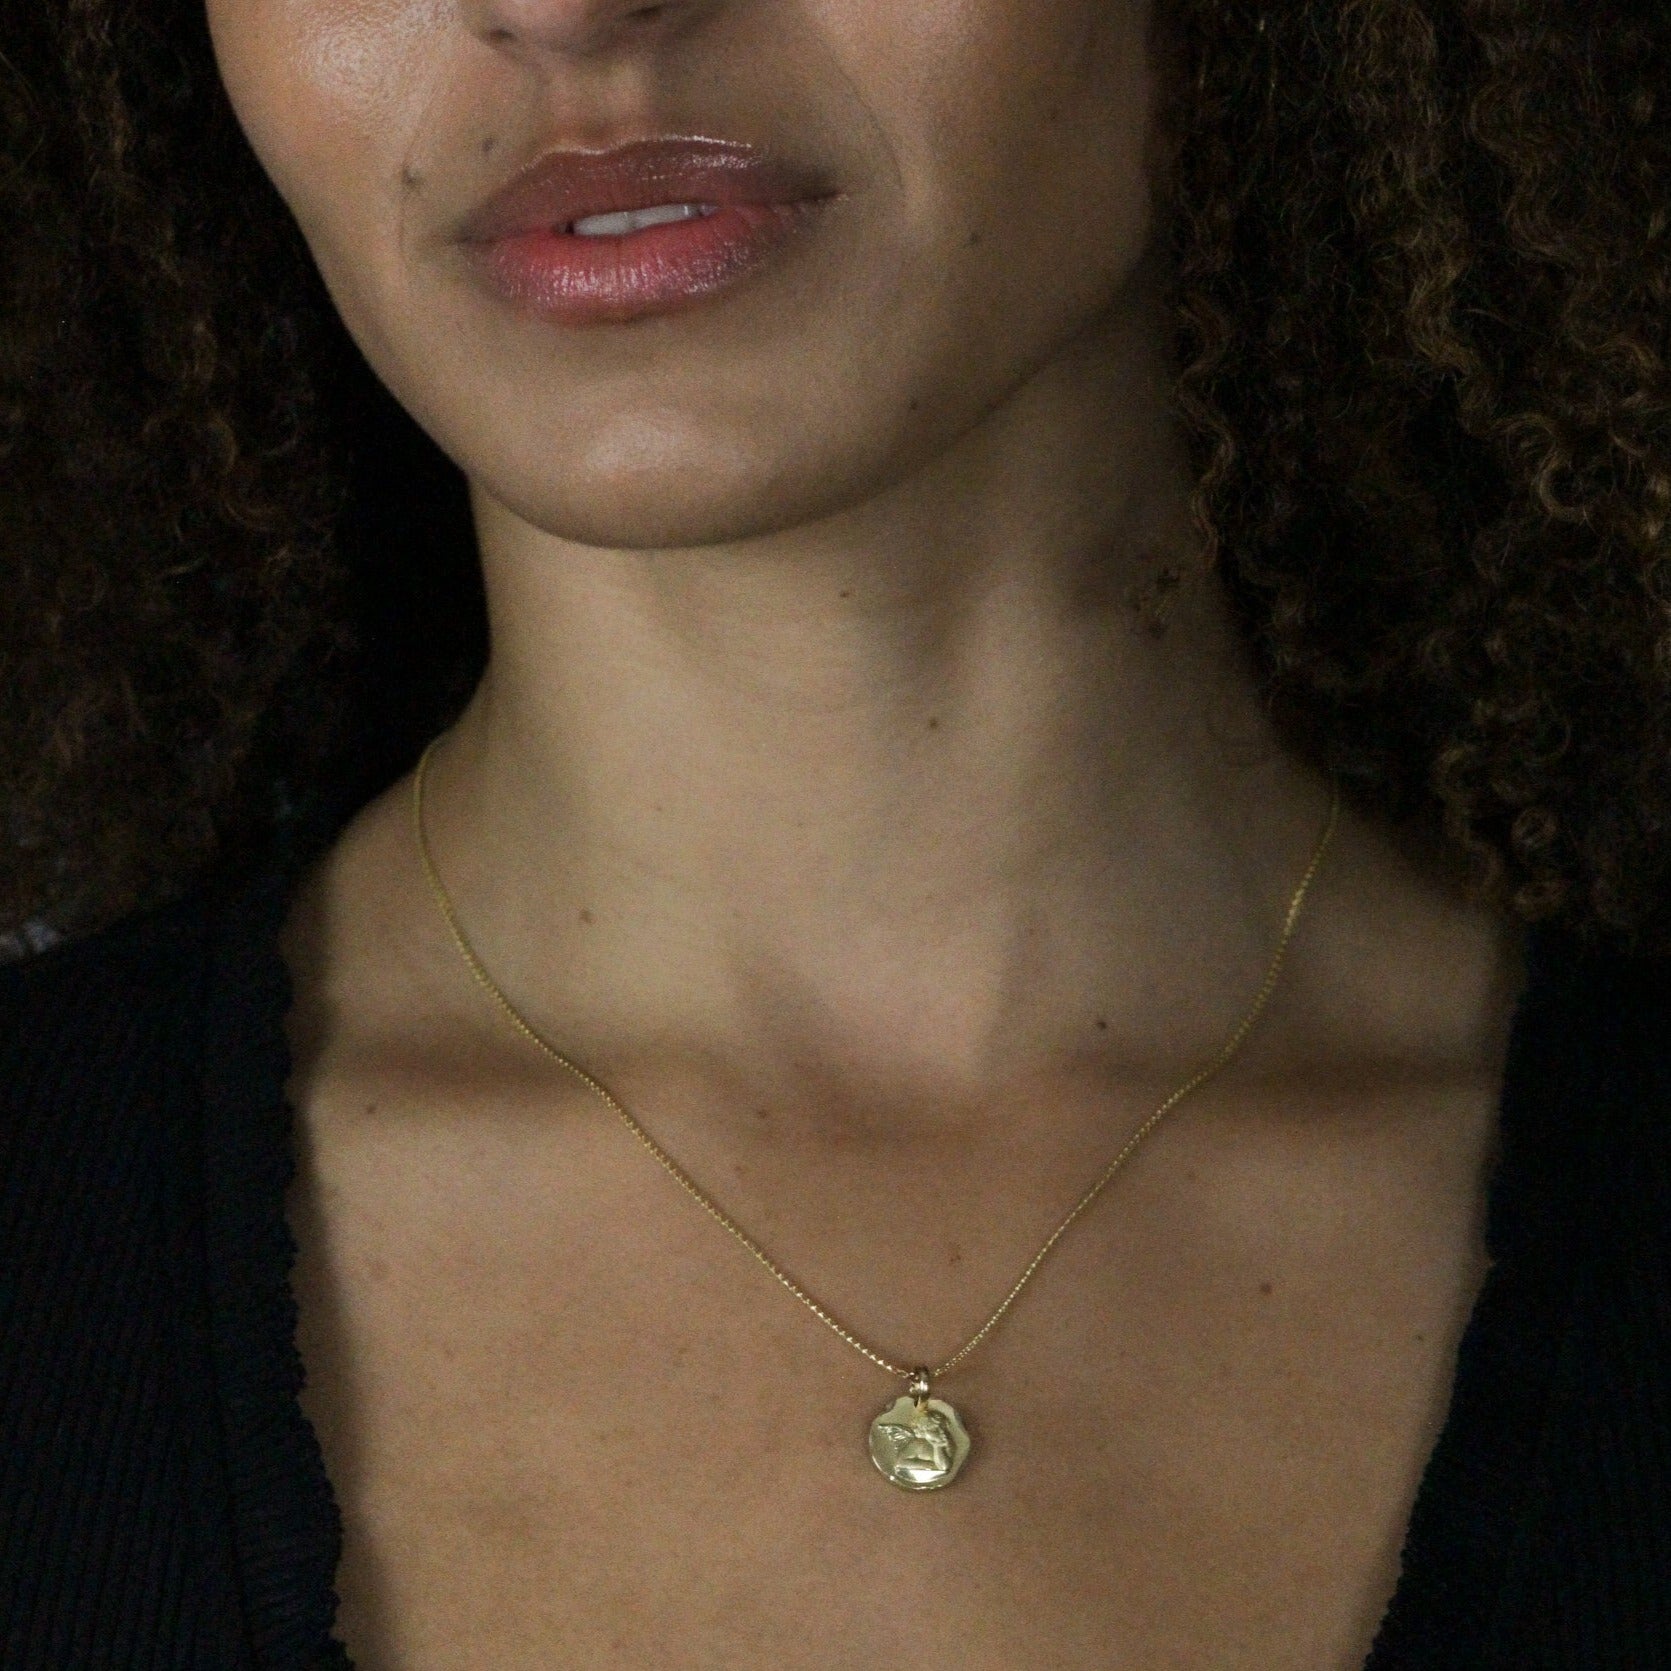 Gold Necklace Pendant on model